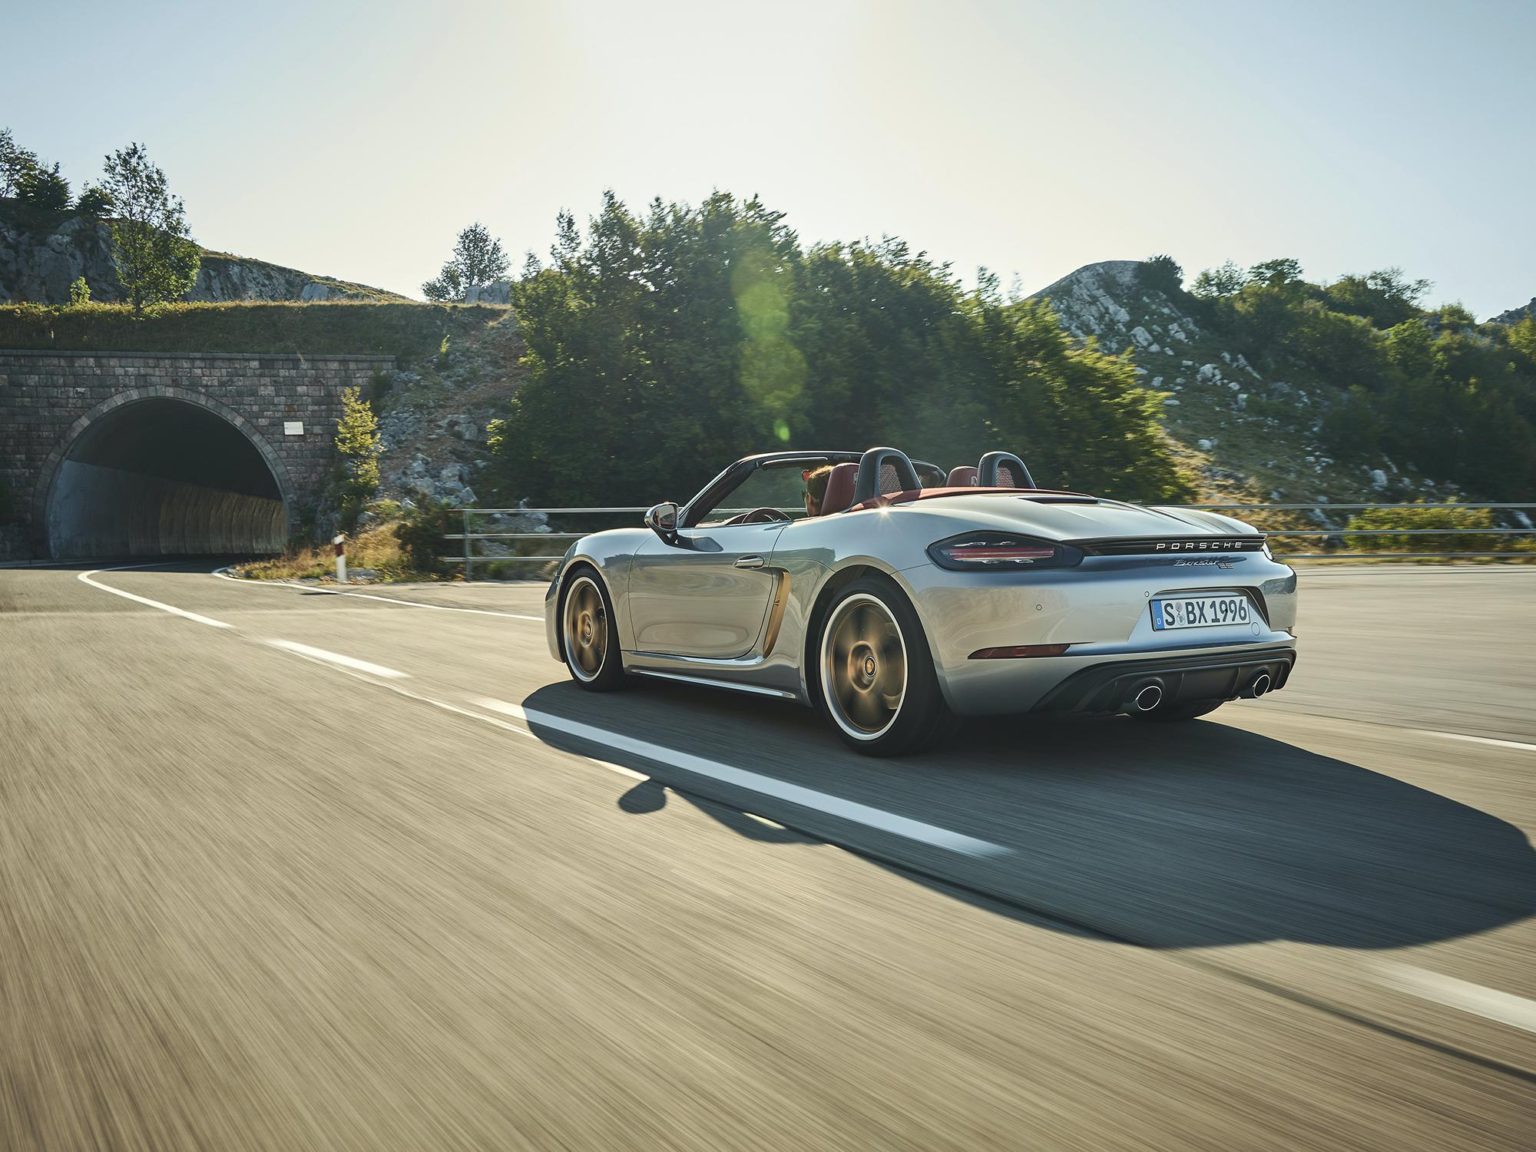 The new Porsche Boxster 25 years celebrates the anniversary of the convertible's debut.